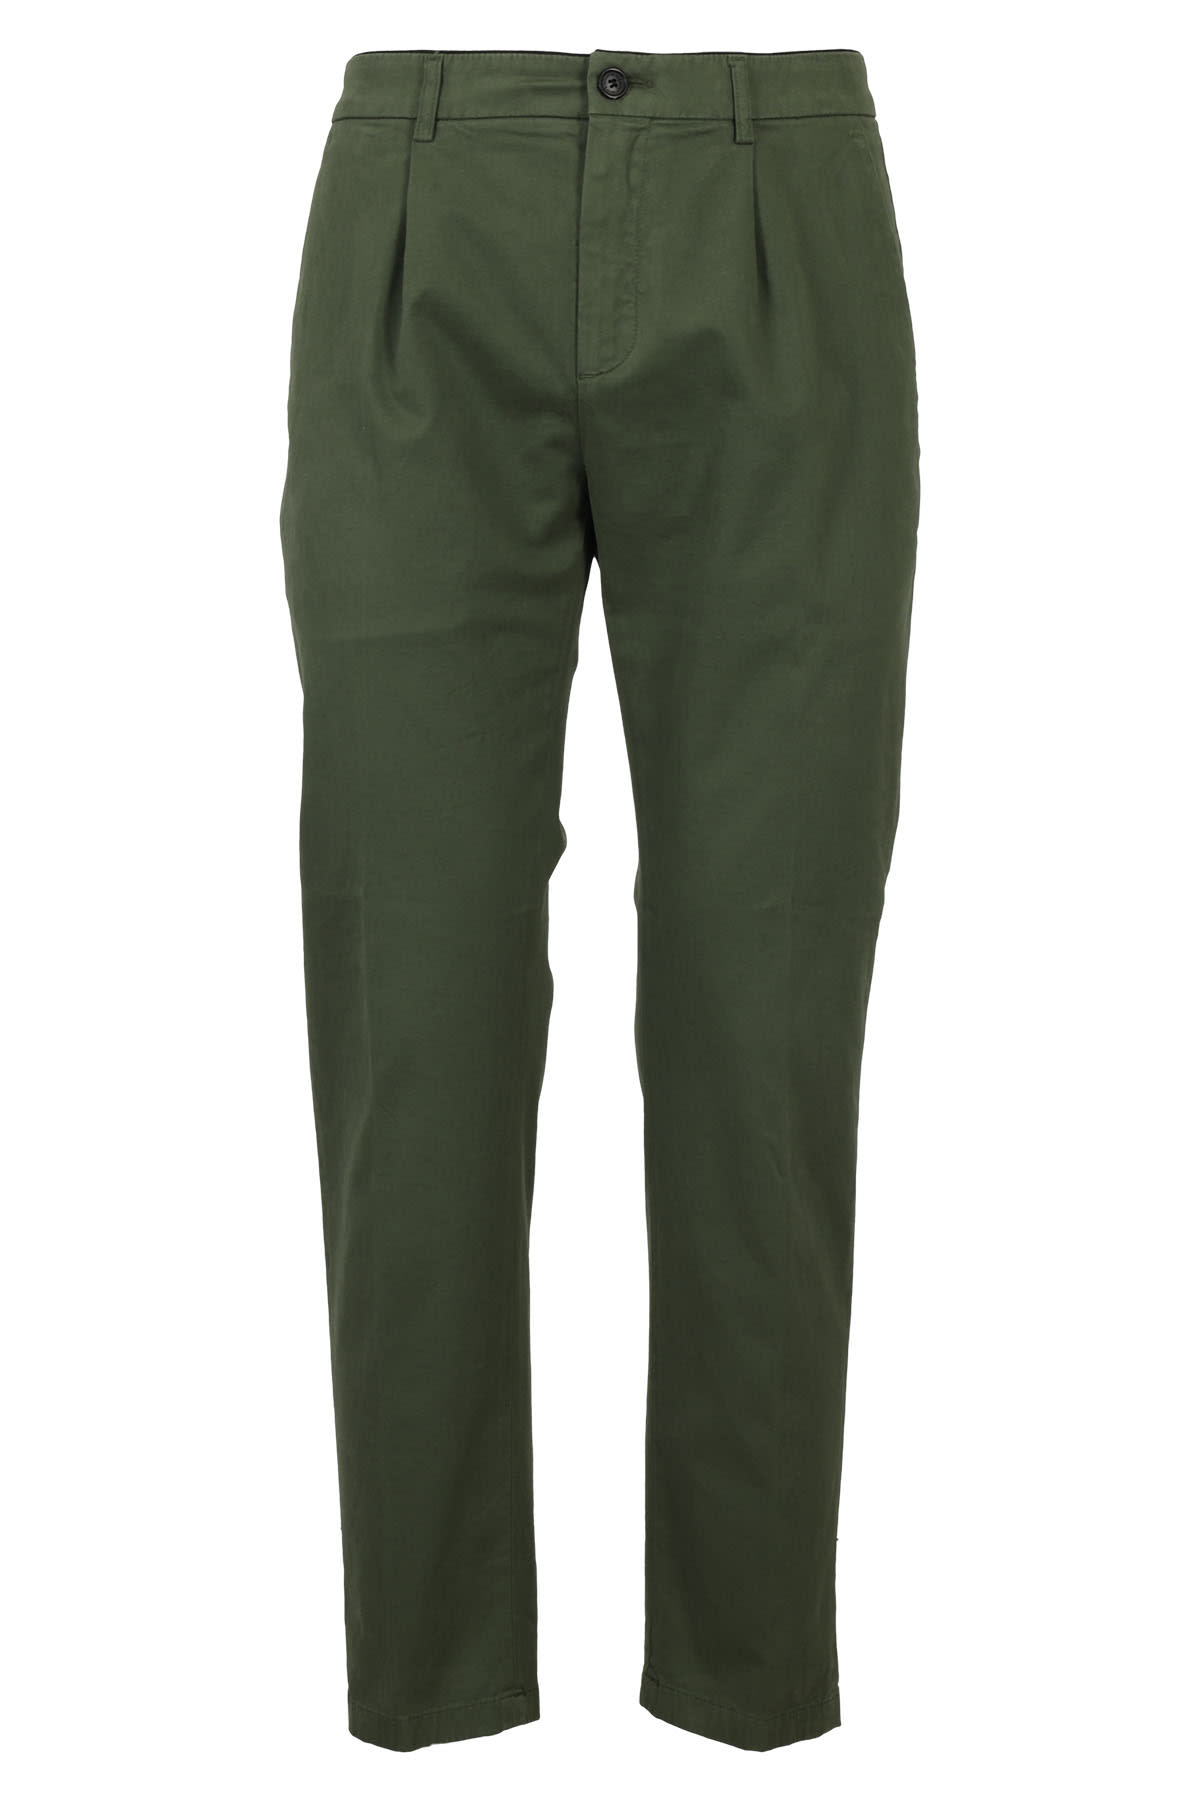 Department Five Prince Pences Chinos In Militare